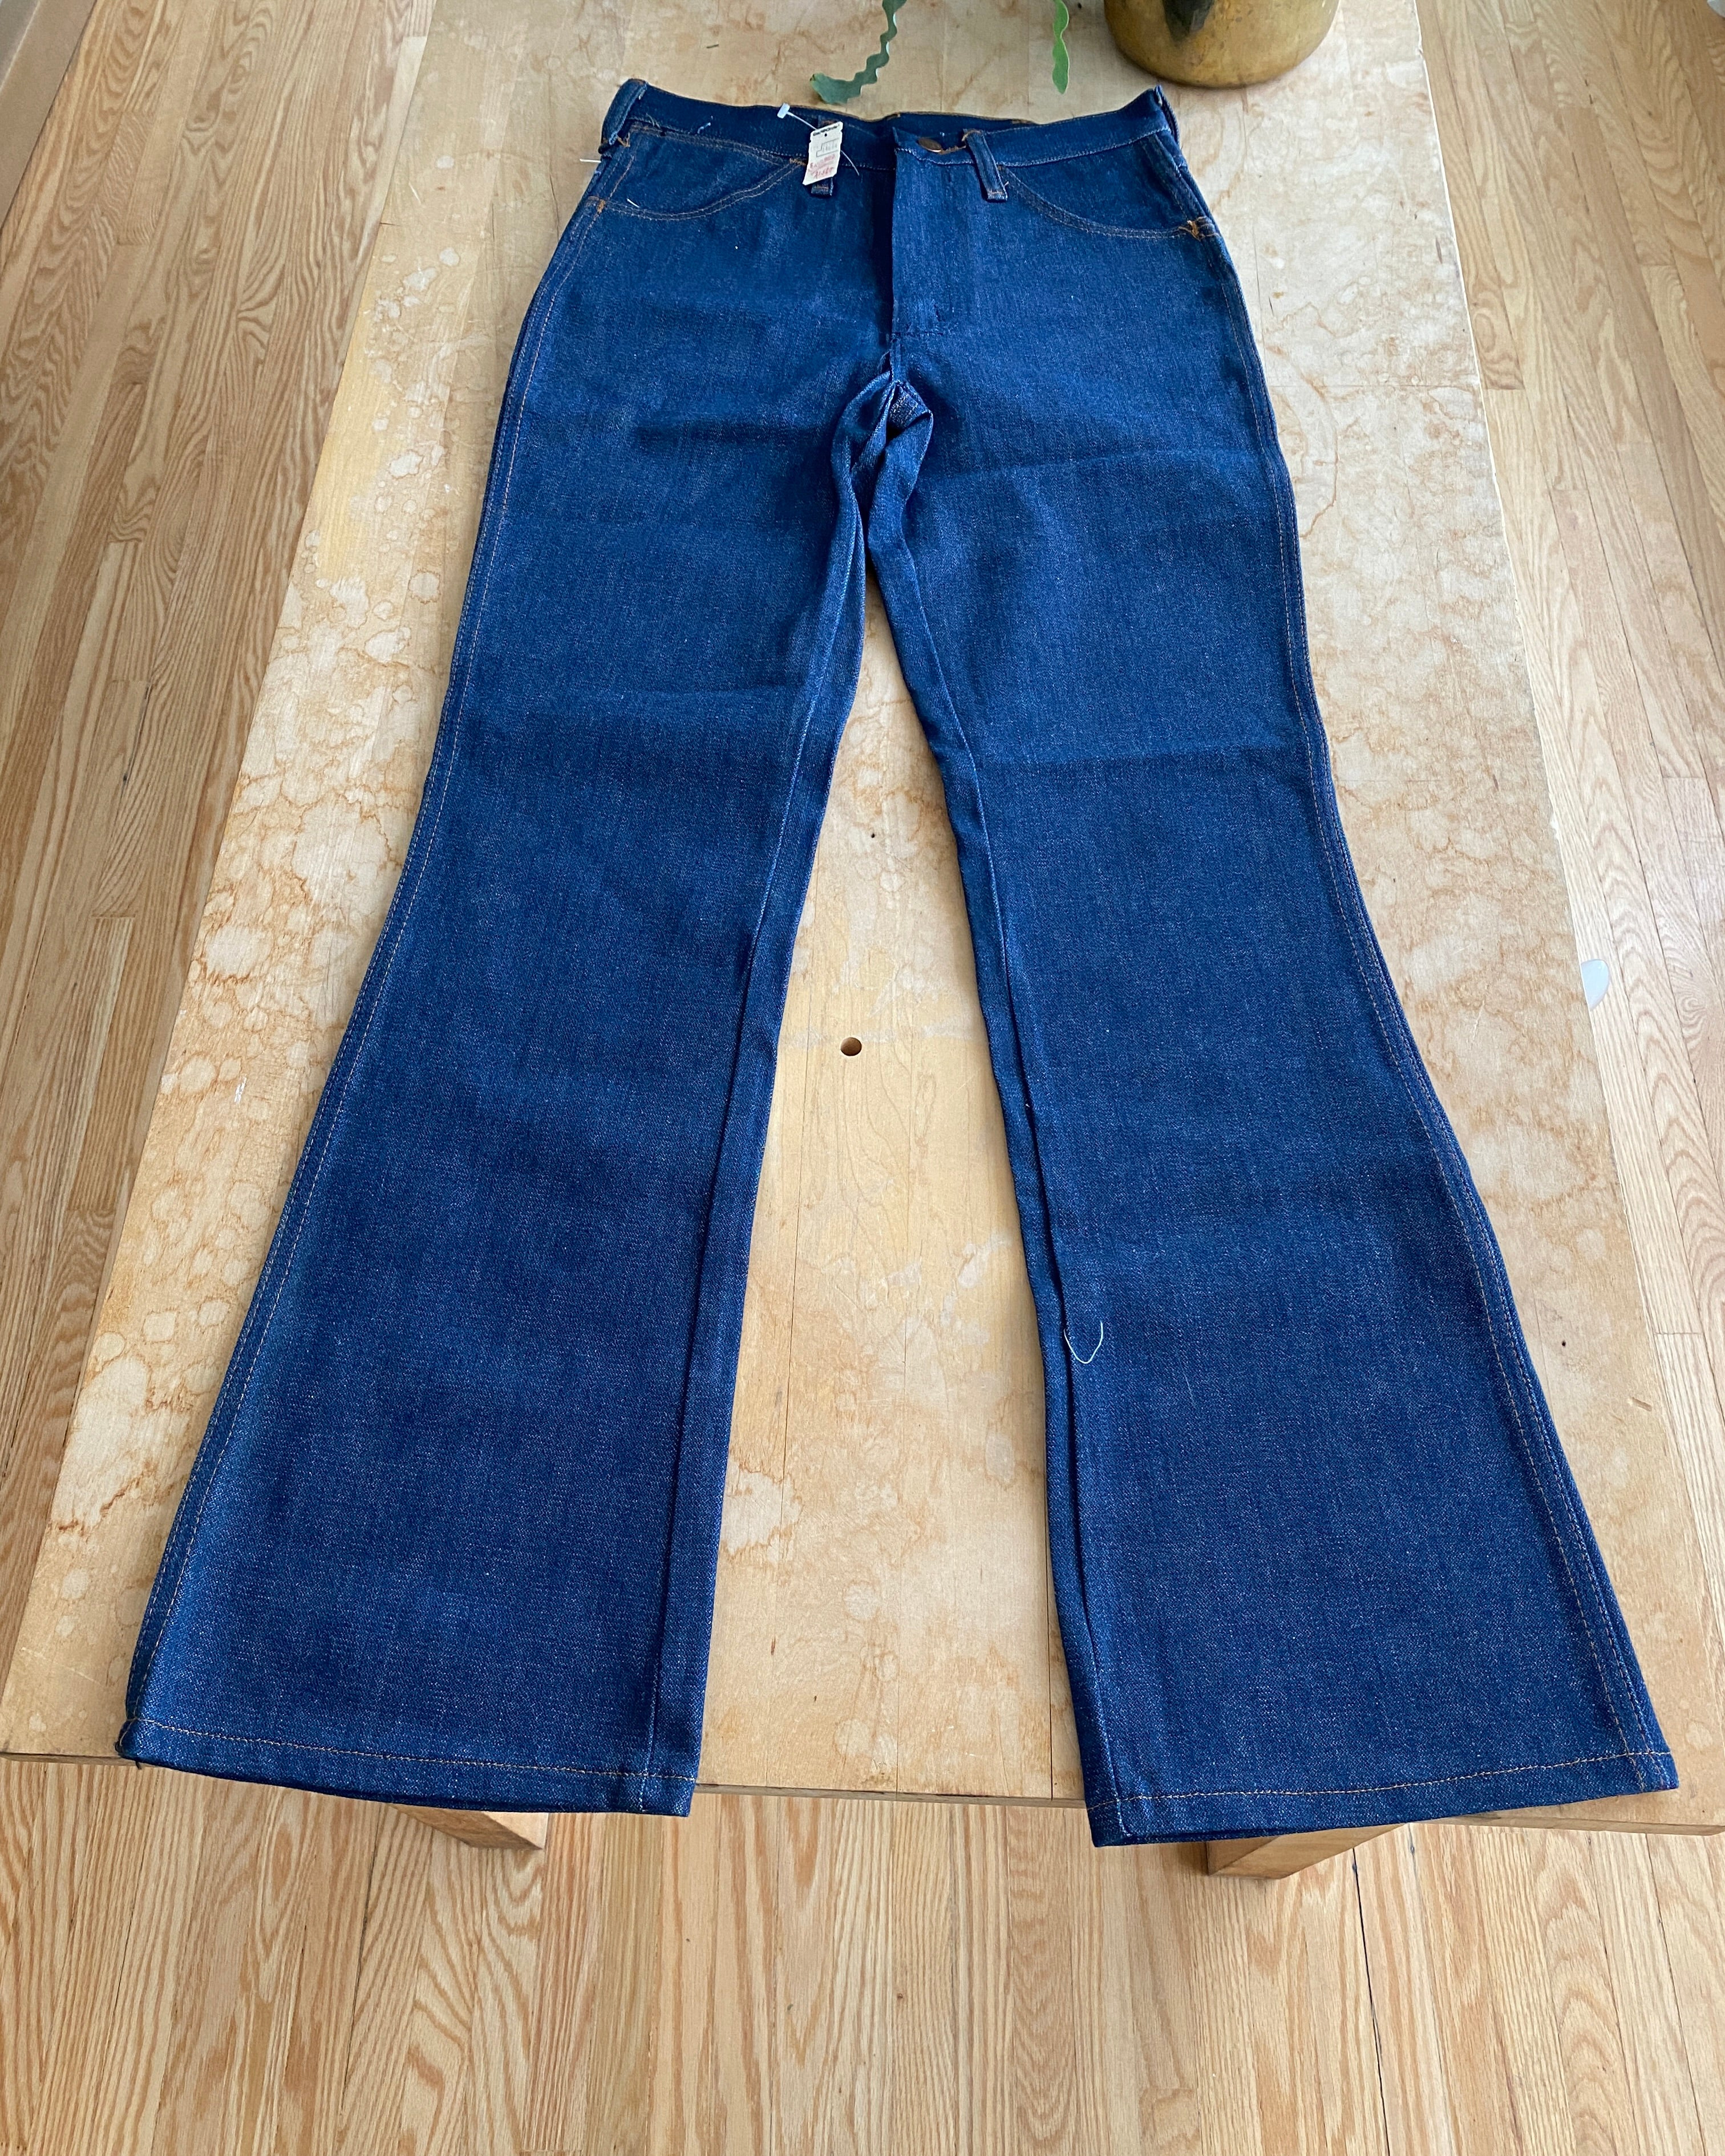 Vintage 1970s Dead Stock Jeans with Tags BOOT JEAN